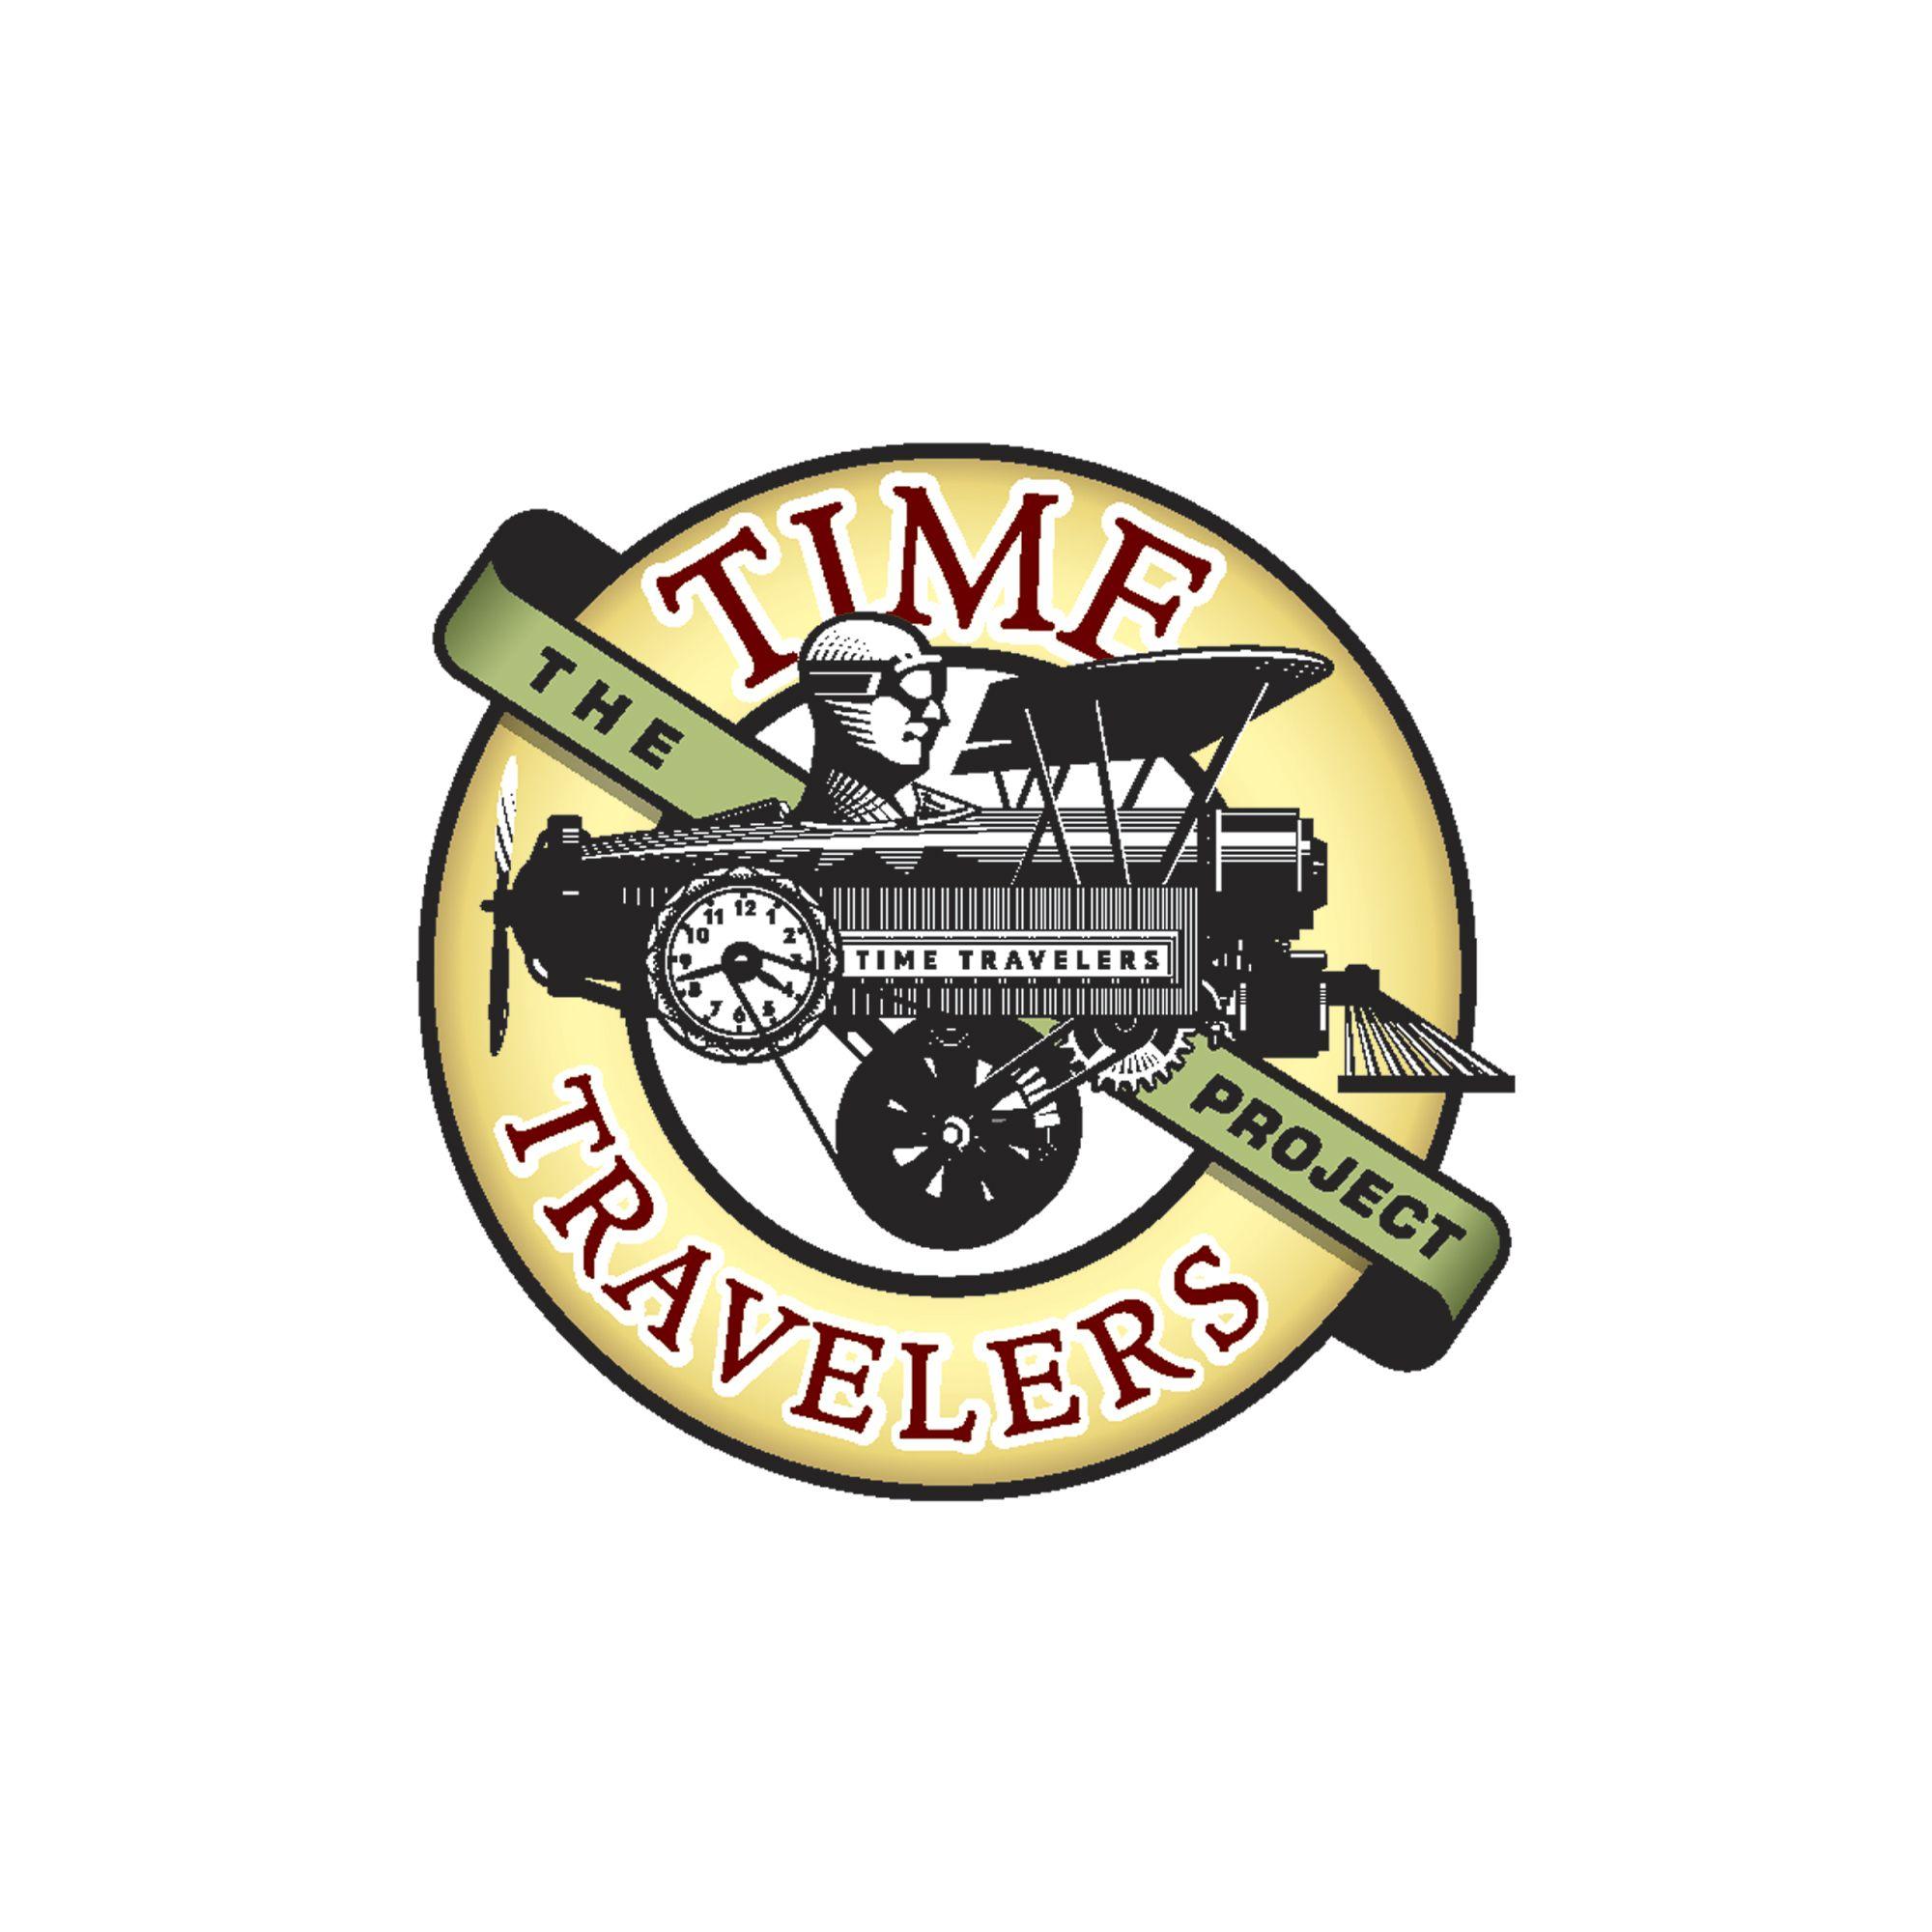 Travellers Logo - Time Travelers logo - Graphis